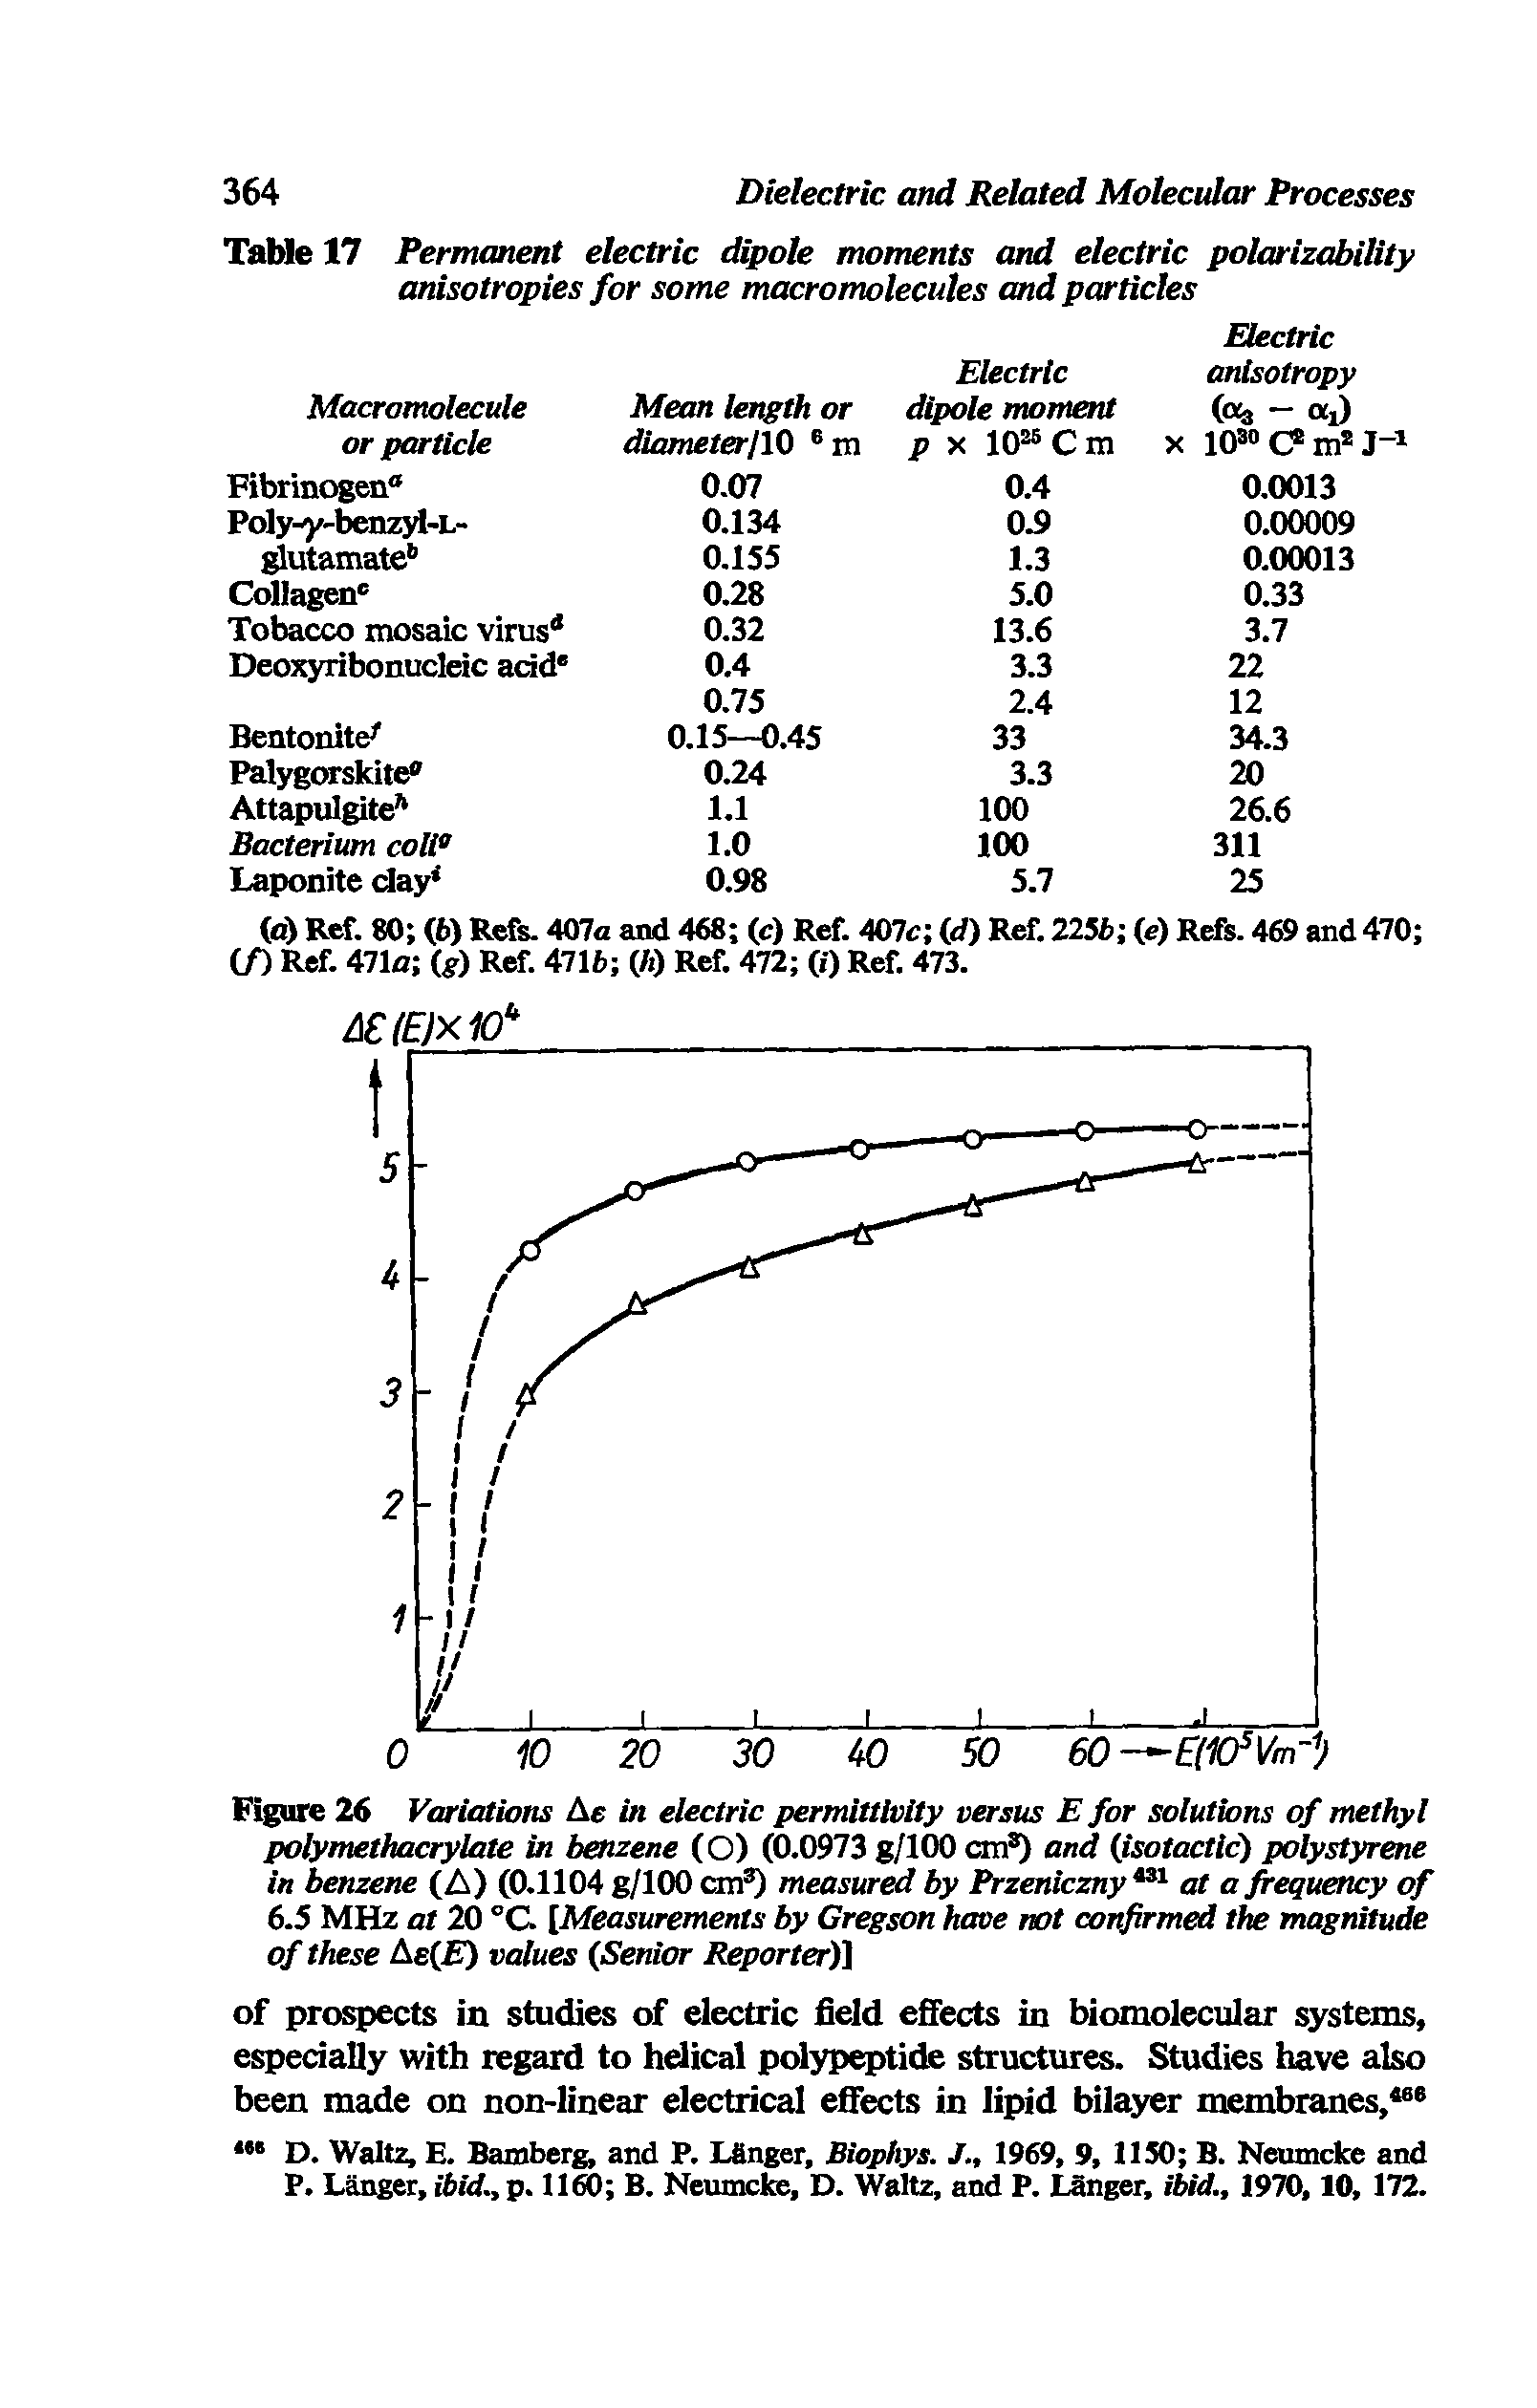 Figure 26 Variations Ae in electric permittivity versus E for solutions of methyl polymethacrylate in benzene (O) (0.0973 g/100 cm ) and isotactic) polystyrene in benzene (A) (0.1104 g/100 cm ) measured by Przeniczny at a frequency of 6.5 MHz at 20 °C [Measurements by Gregson have not confirmed the magnitude of these Ae E) values (Senior Reporter) ...